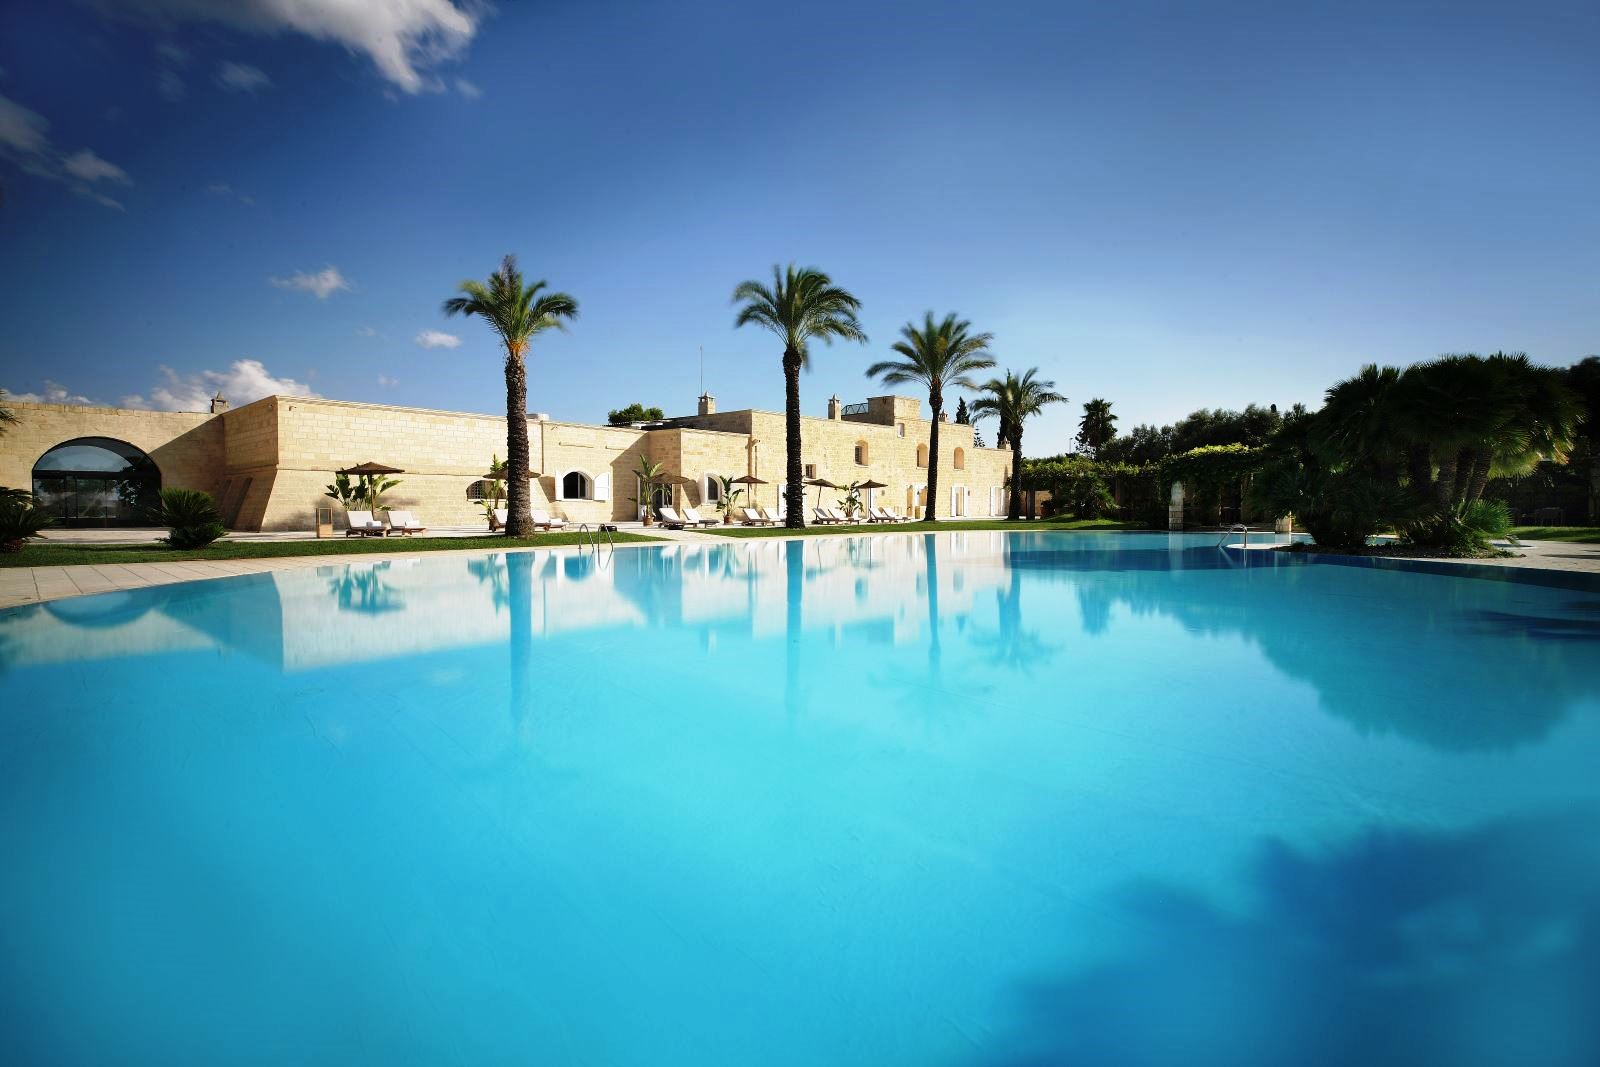 view over the pool of the exterior of villa masseria dei papi in Puglia, Italy with a line of 4 palm trees in front